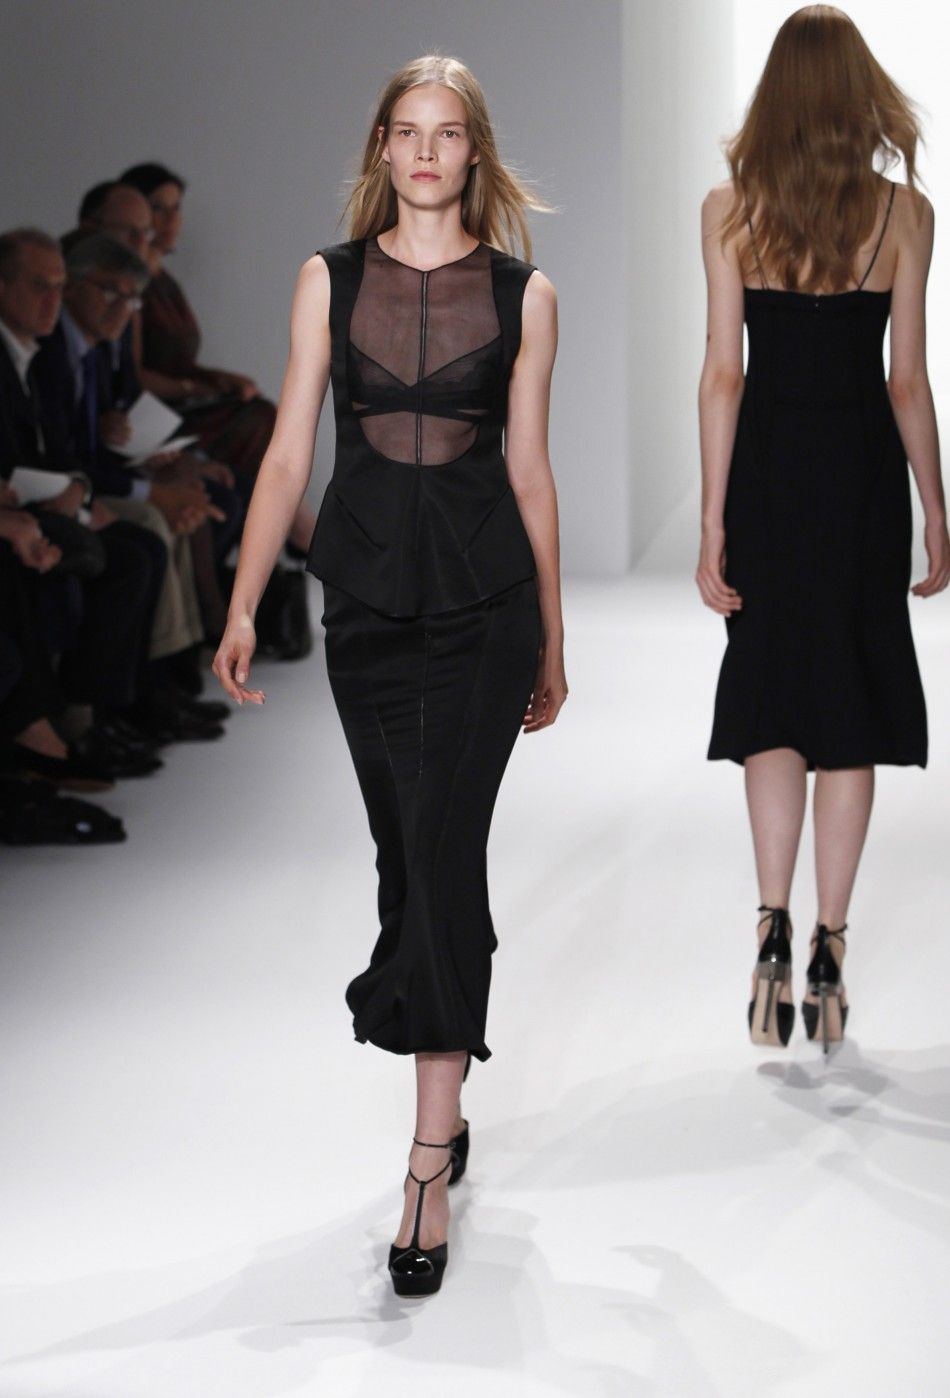 Calvin Klein Opts for Neutral and Monochromatic Hues at 2012 New York Fashion Week